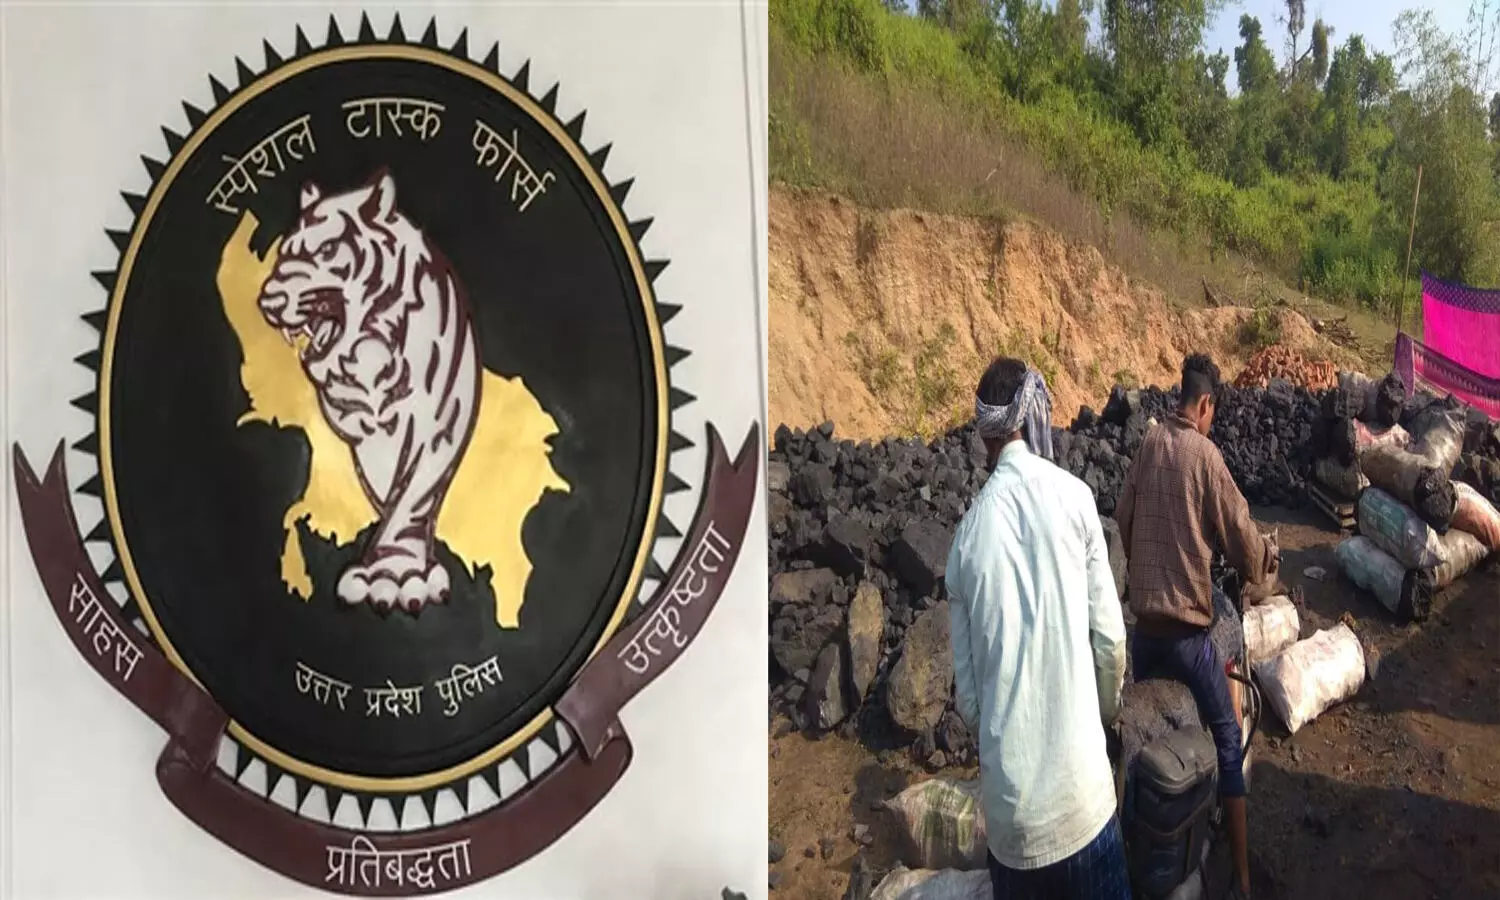 Coal Smuggling: STF caught coal smugglers amid power crisis, 5 thousand quintals of coal recovered